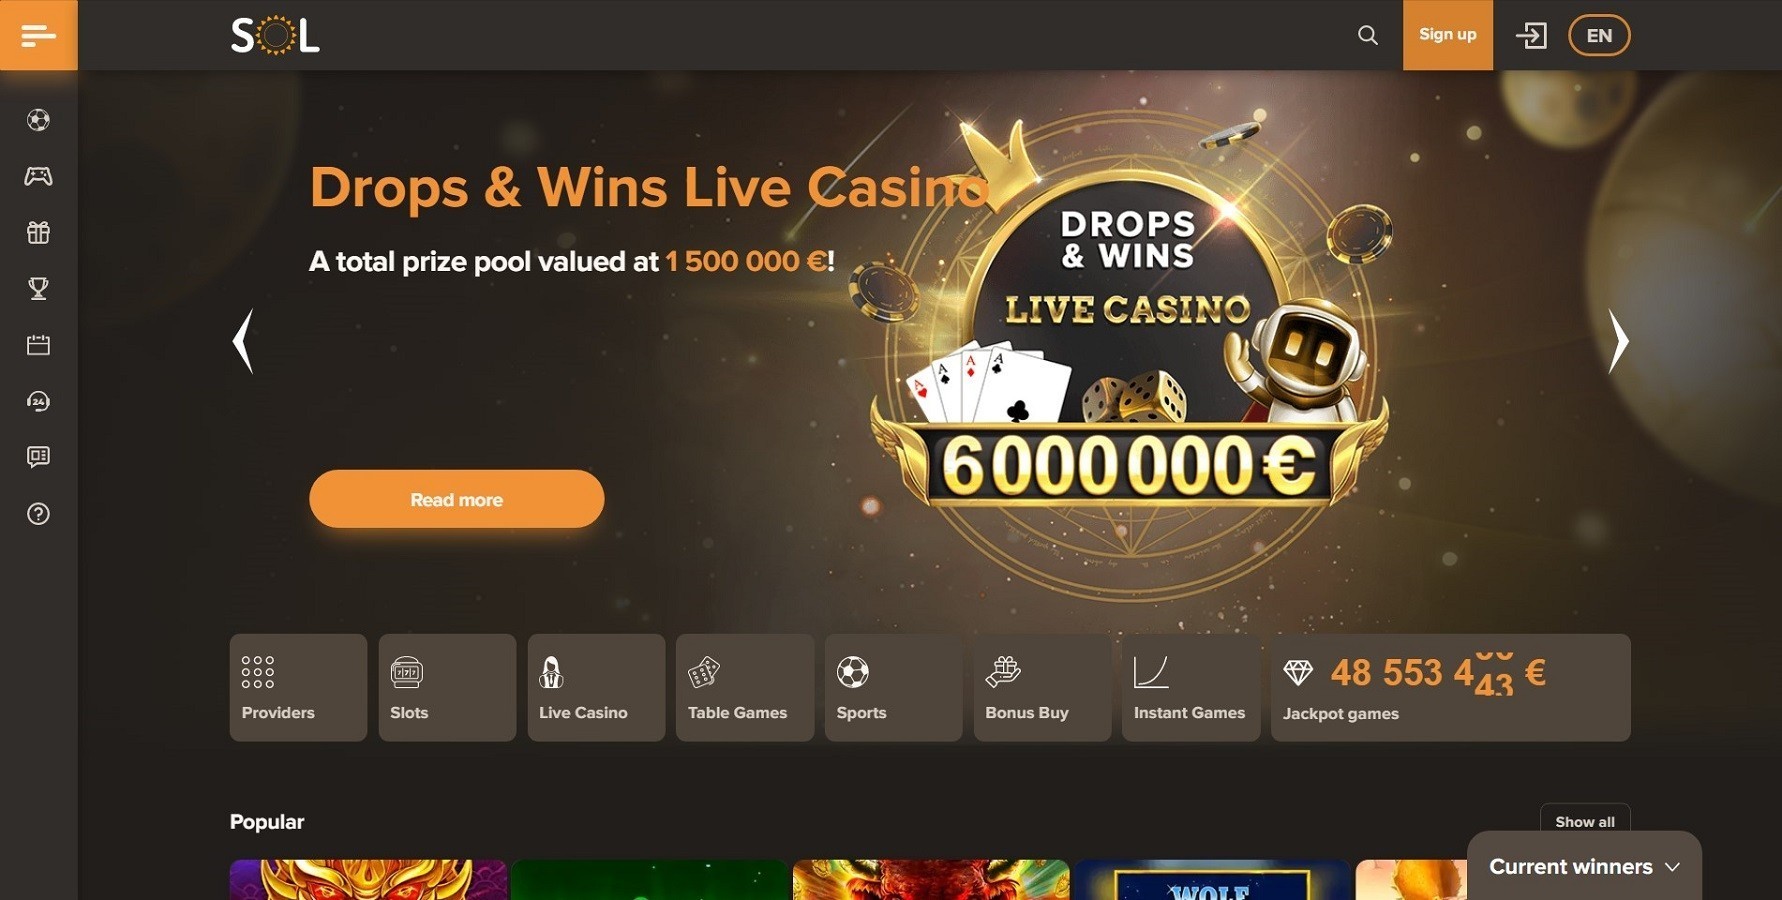 About Sol Online Casino